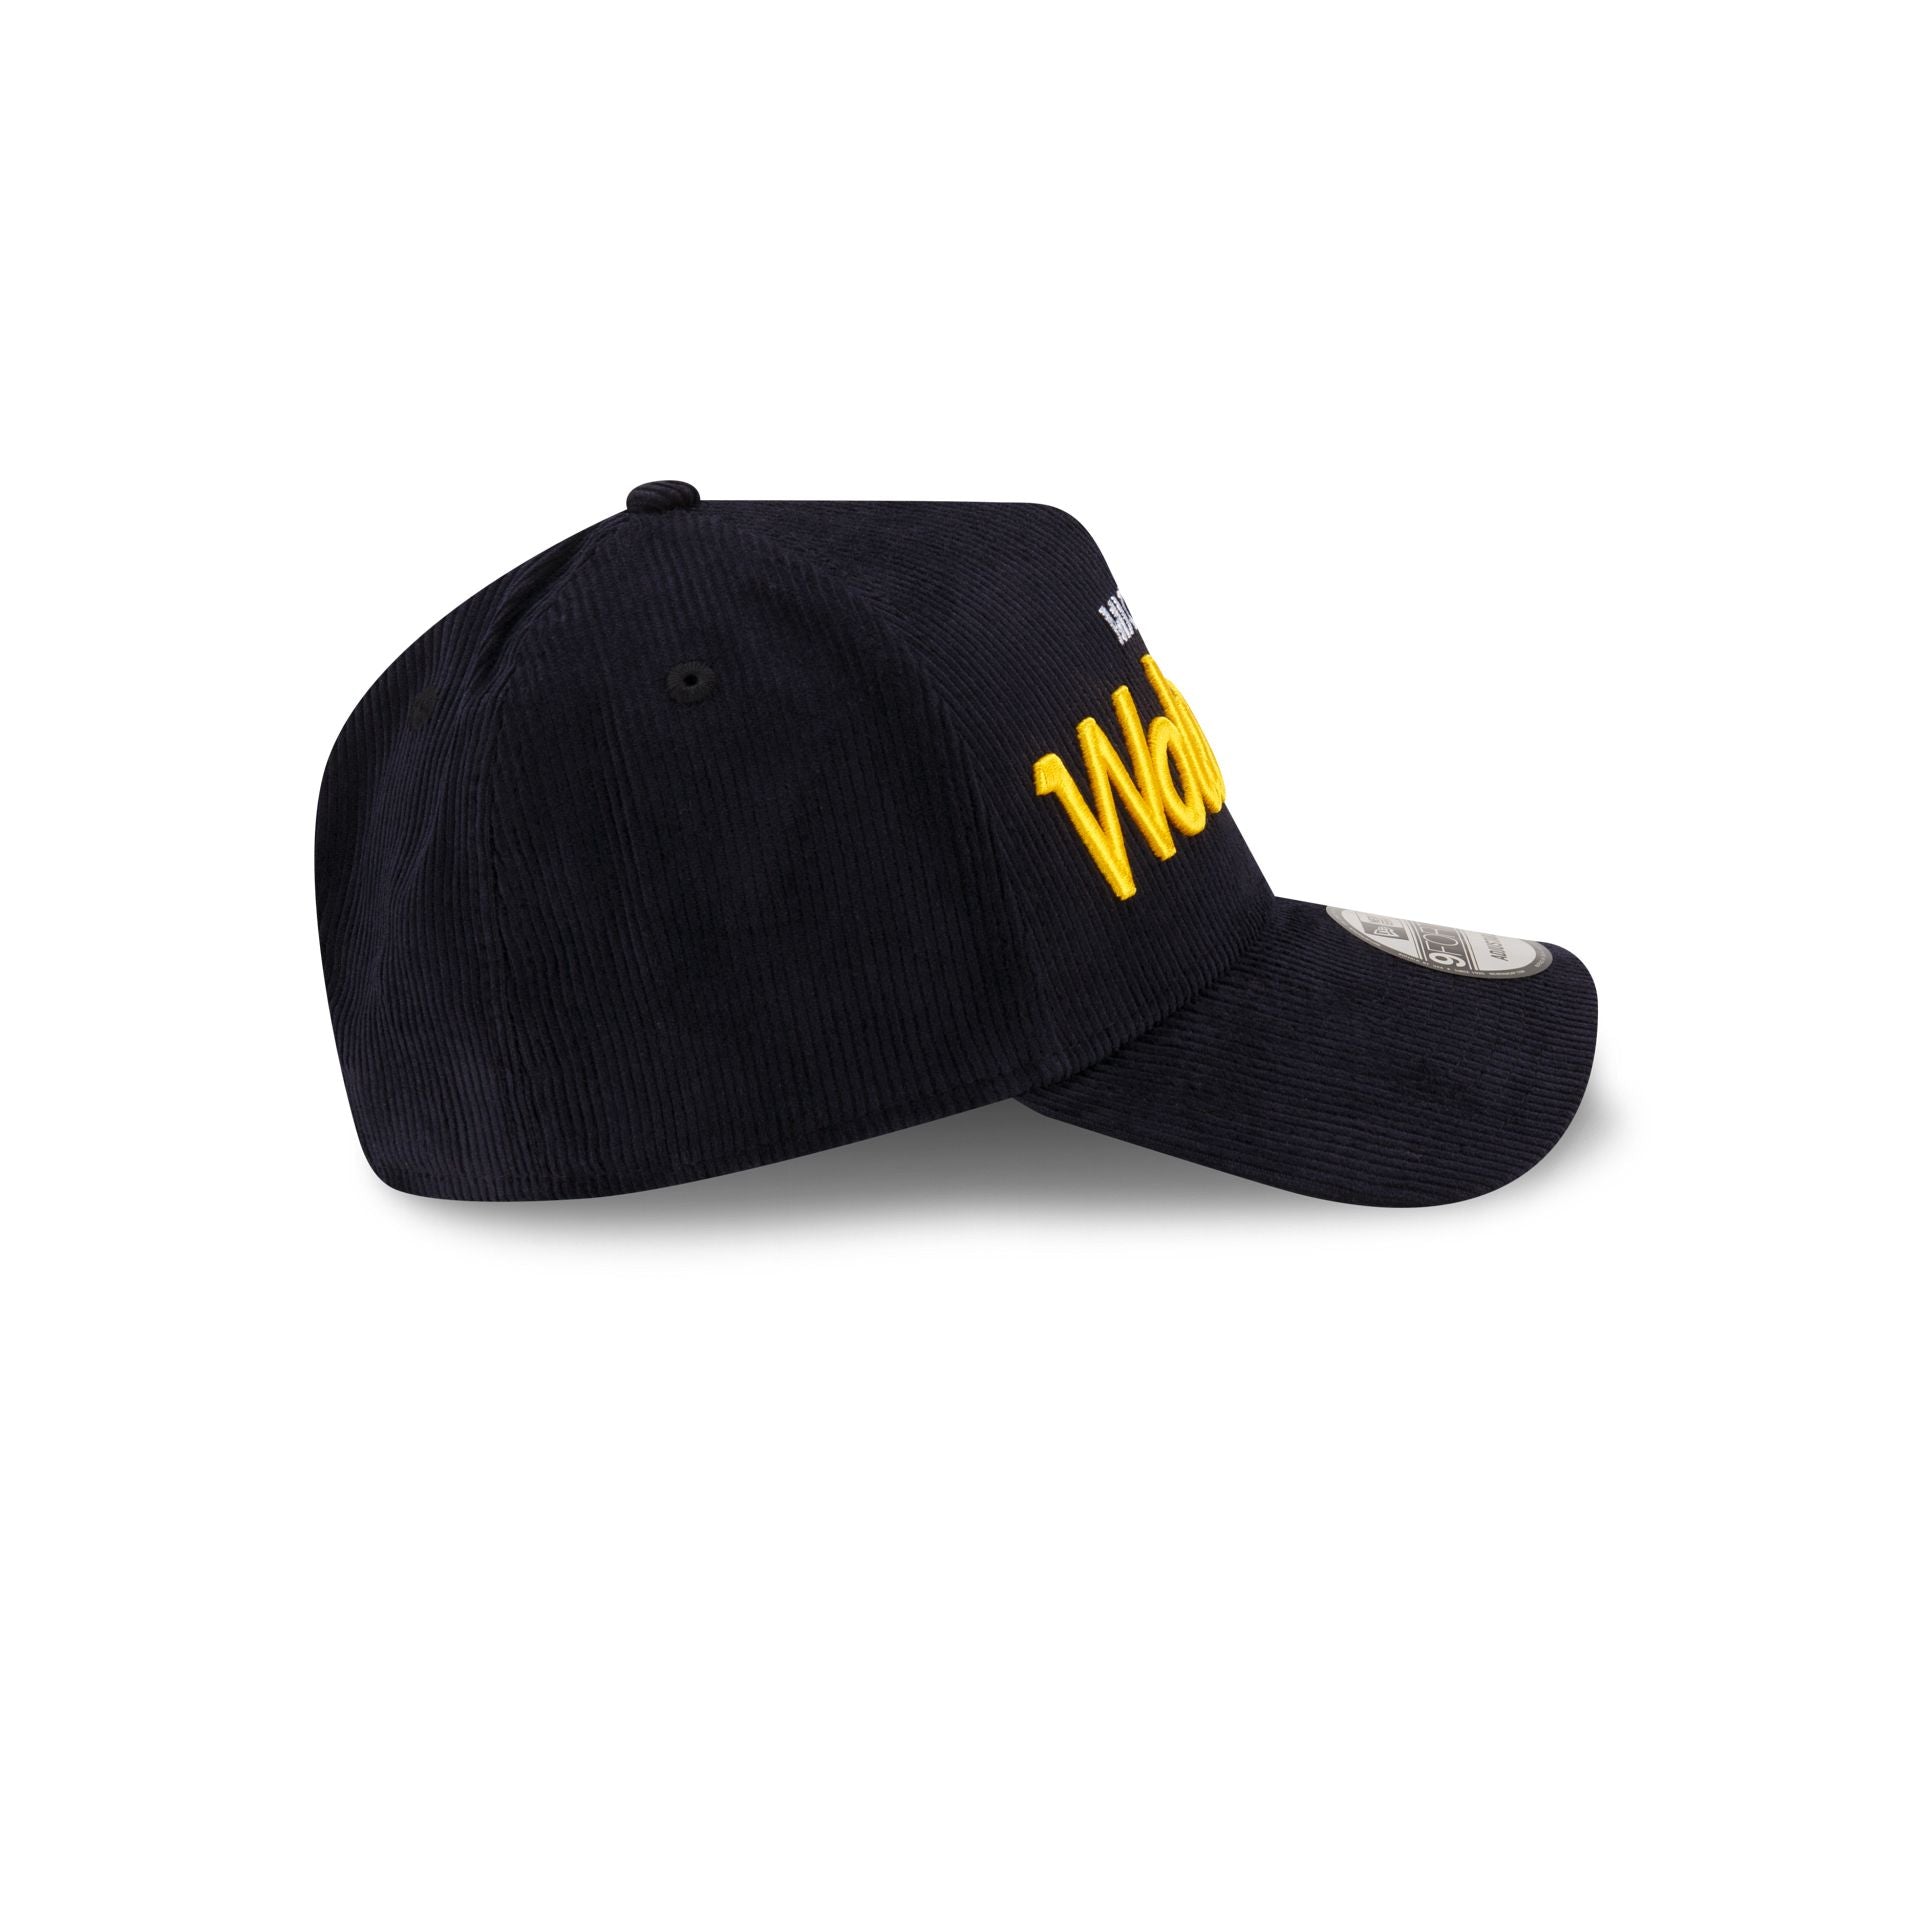 Michigan Wolverines Collegiate Corduroy 9FORTY A-Frame Snapback